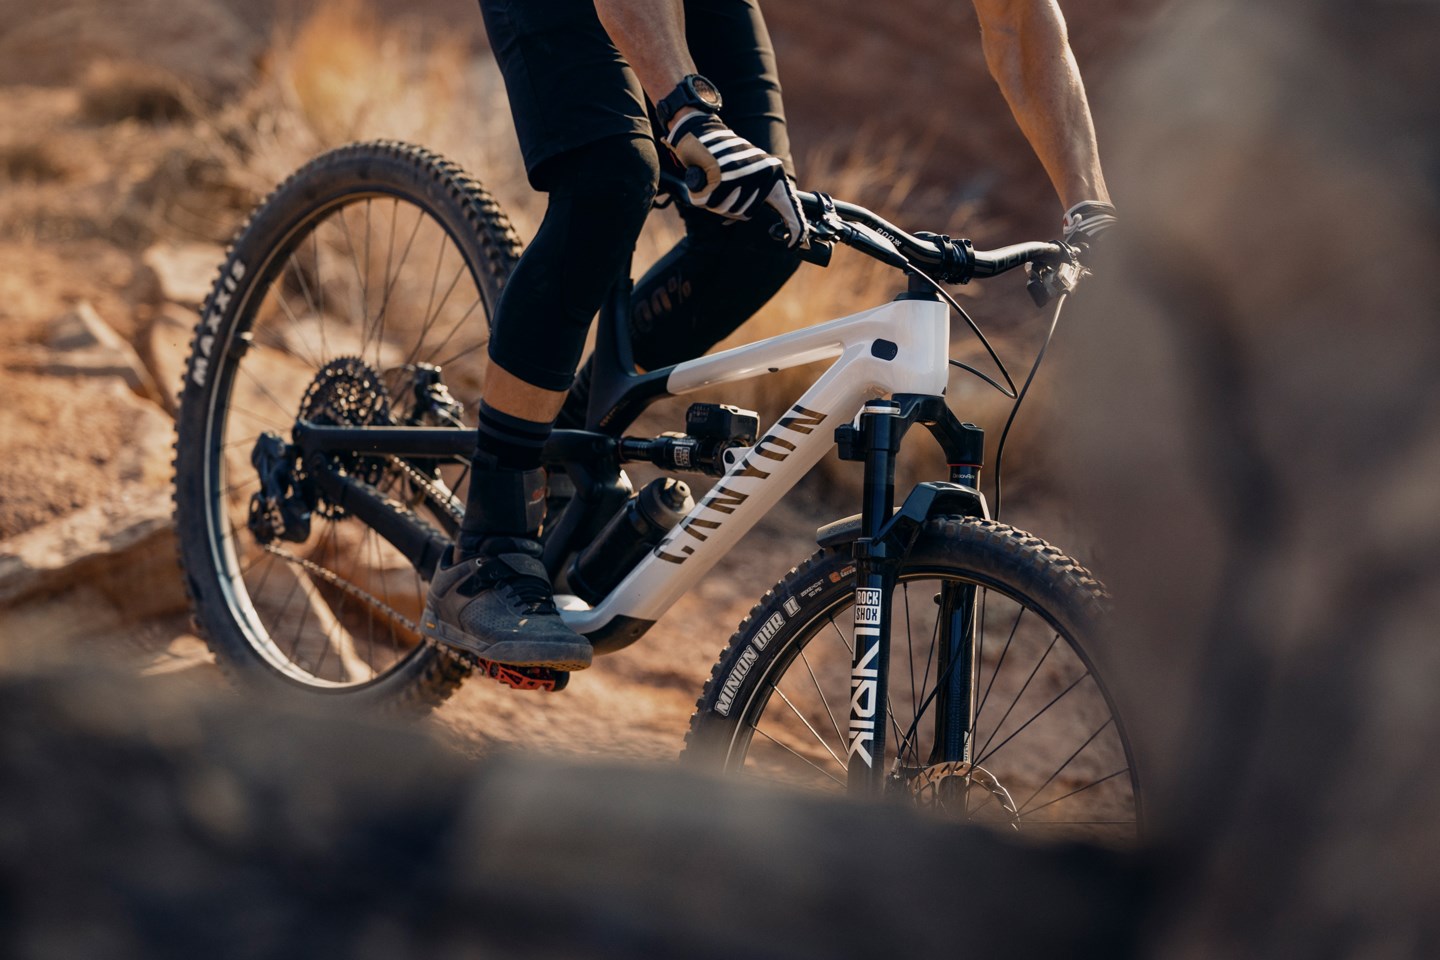 Zoomed in on Braydon Bringhurst riding Flight Attendant-equipped Canyon Spectral.